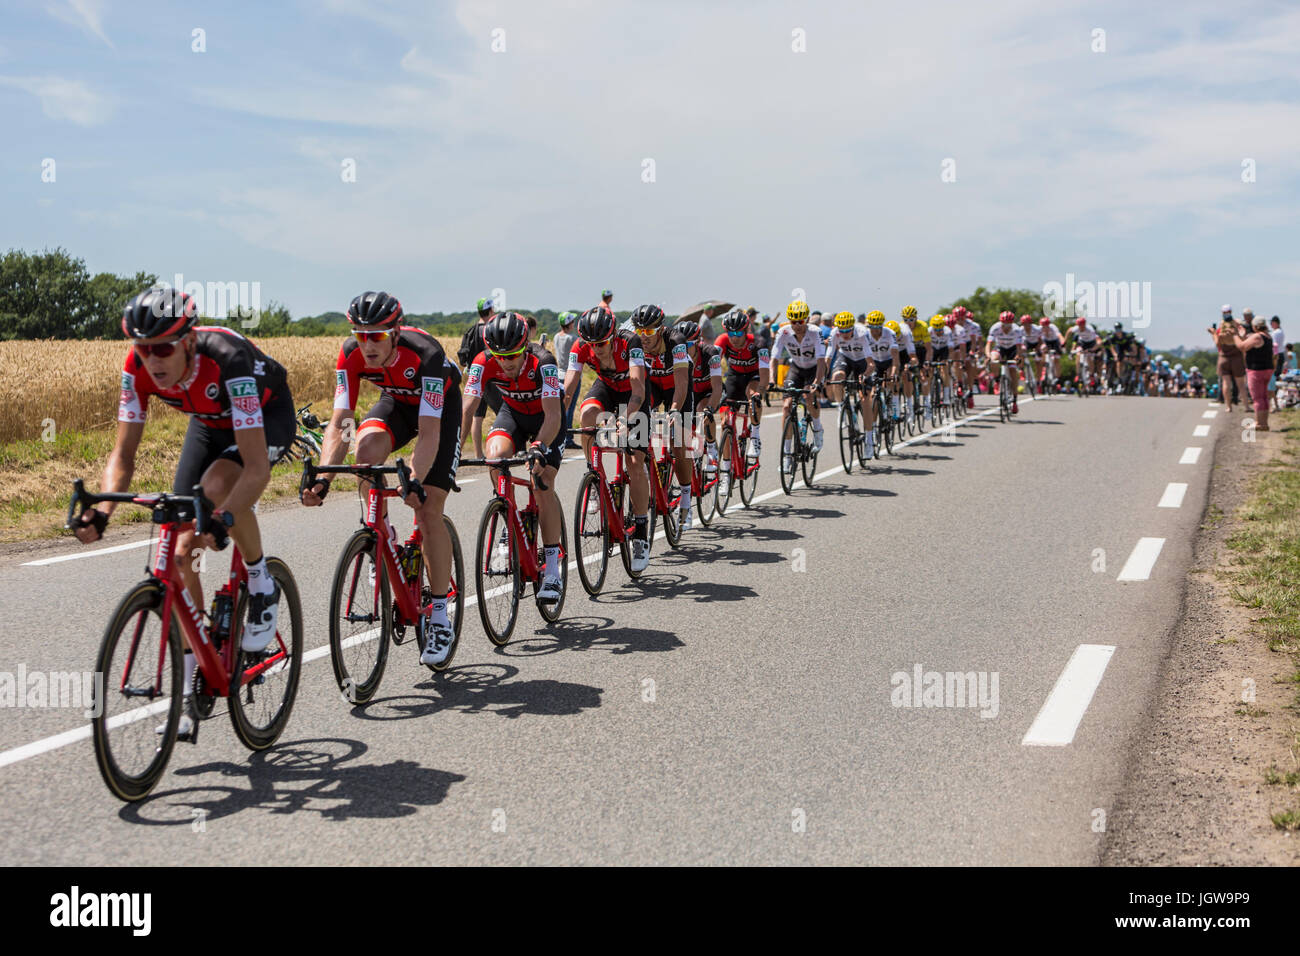 Mailleroncourt-Saint-Pancras, France - July 5, 2017: The BMC Racing Team riding in front of the peloton on a road to La Planche des Belle Filles durin Stock Photo